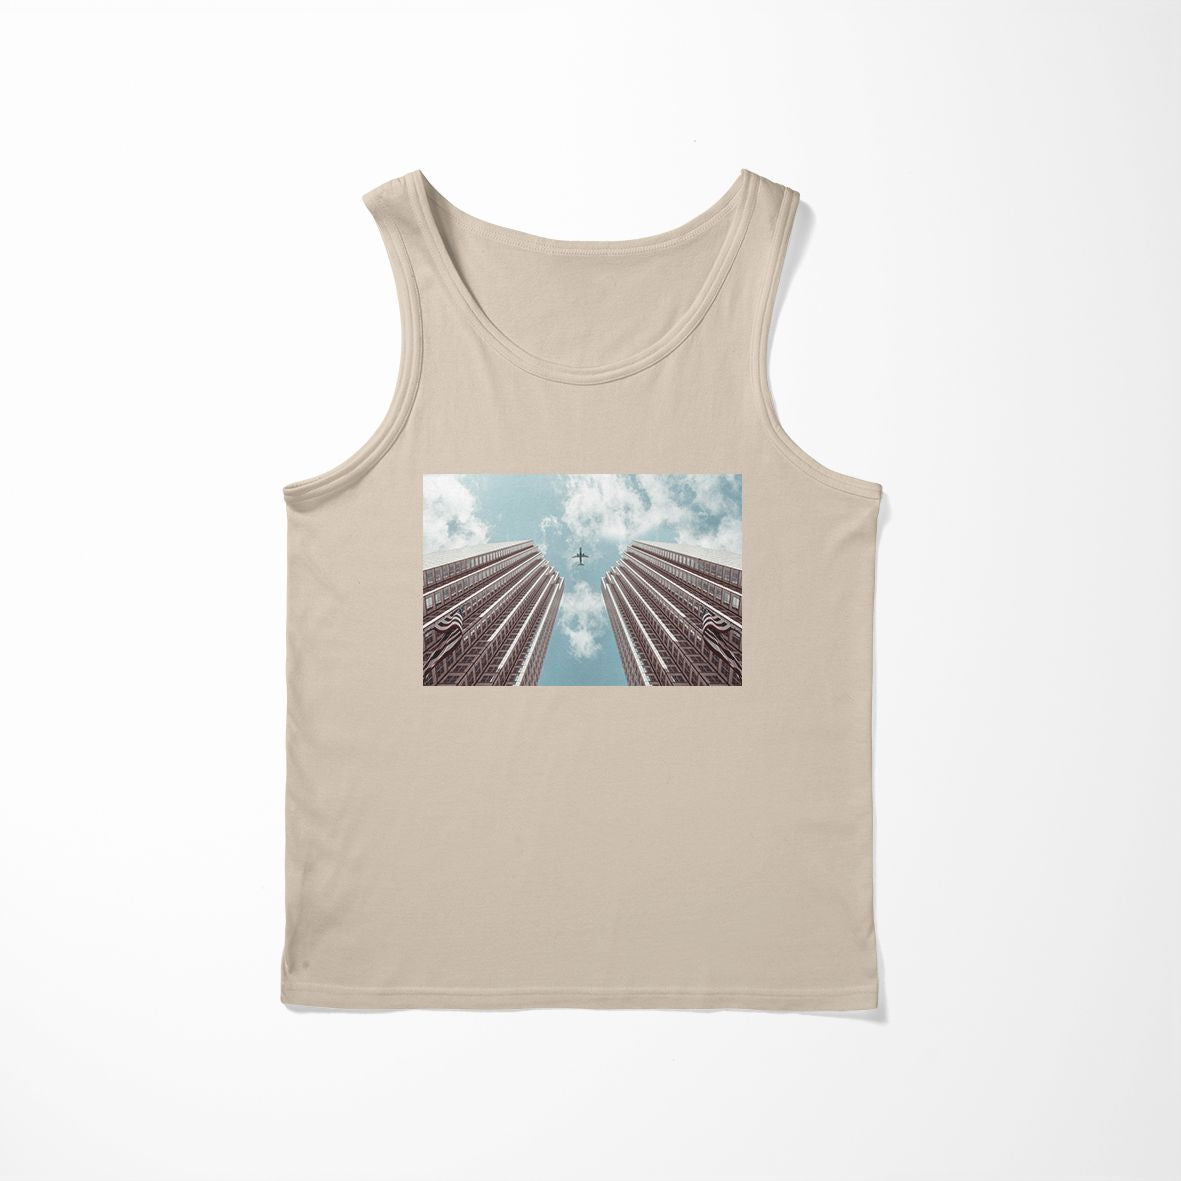 Airplane Flying over Big Buildings Designed Tank Tops